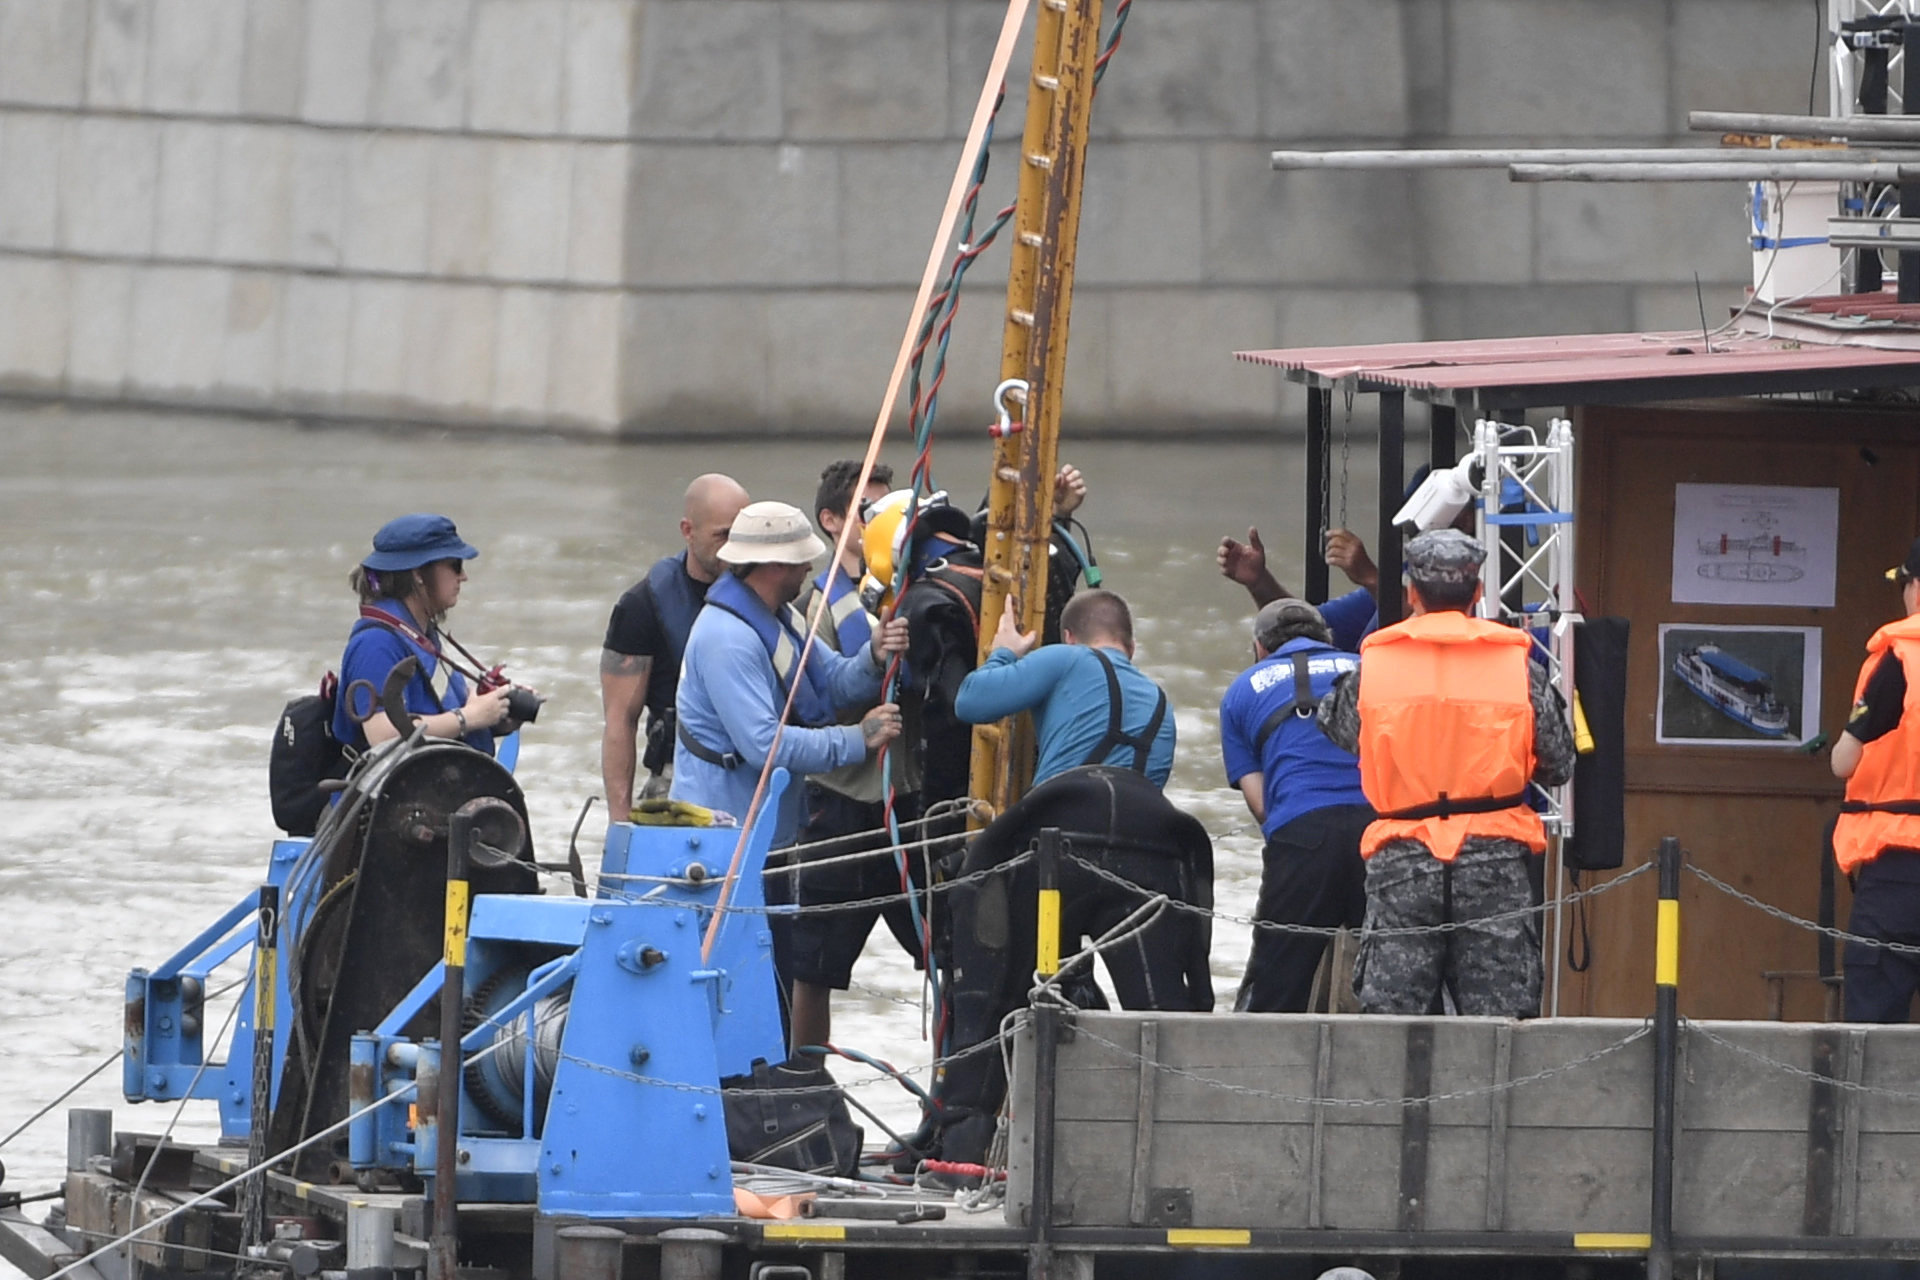 Video: Another Budapest Boat Collision Accident Victim Identified